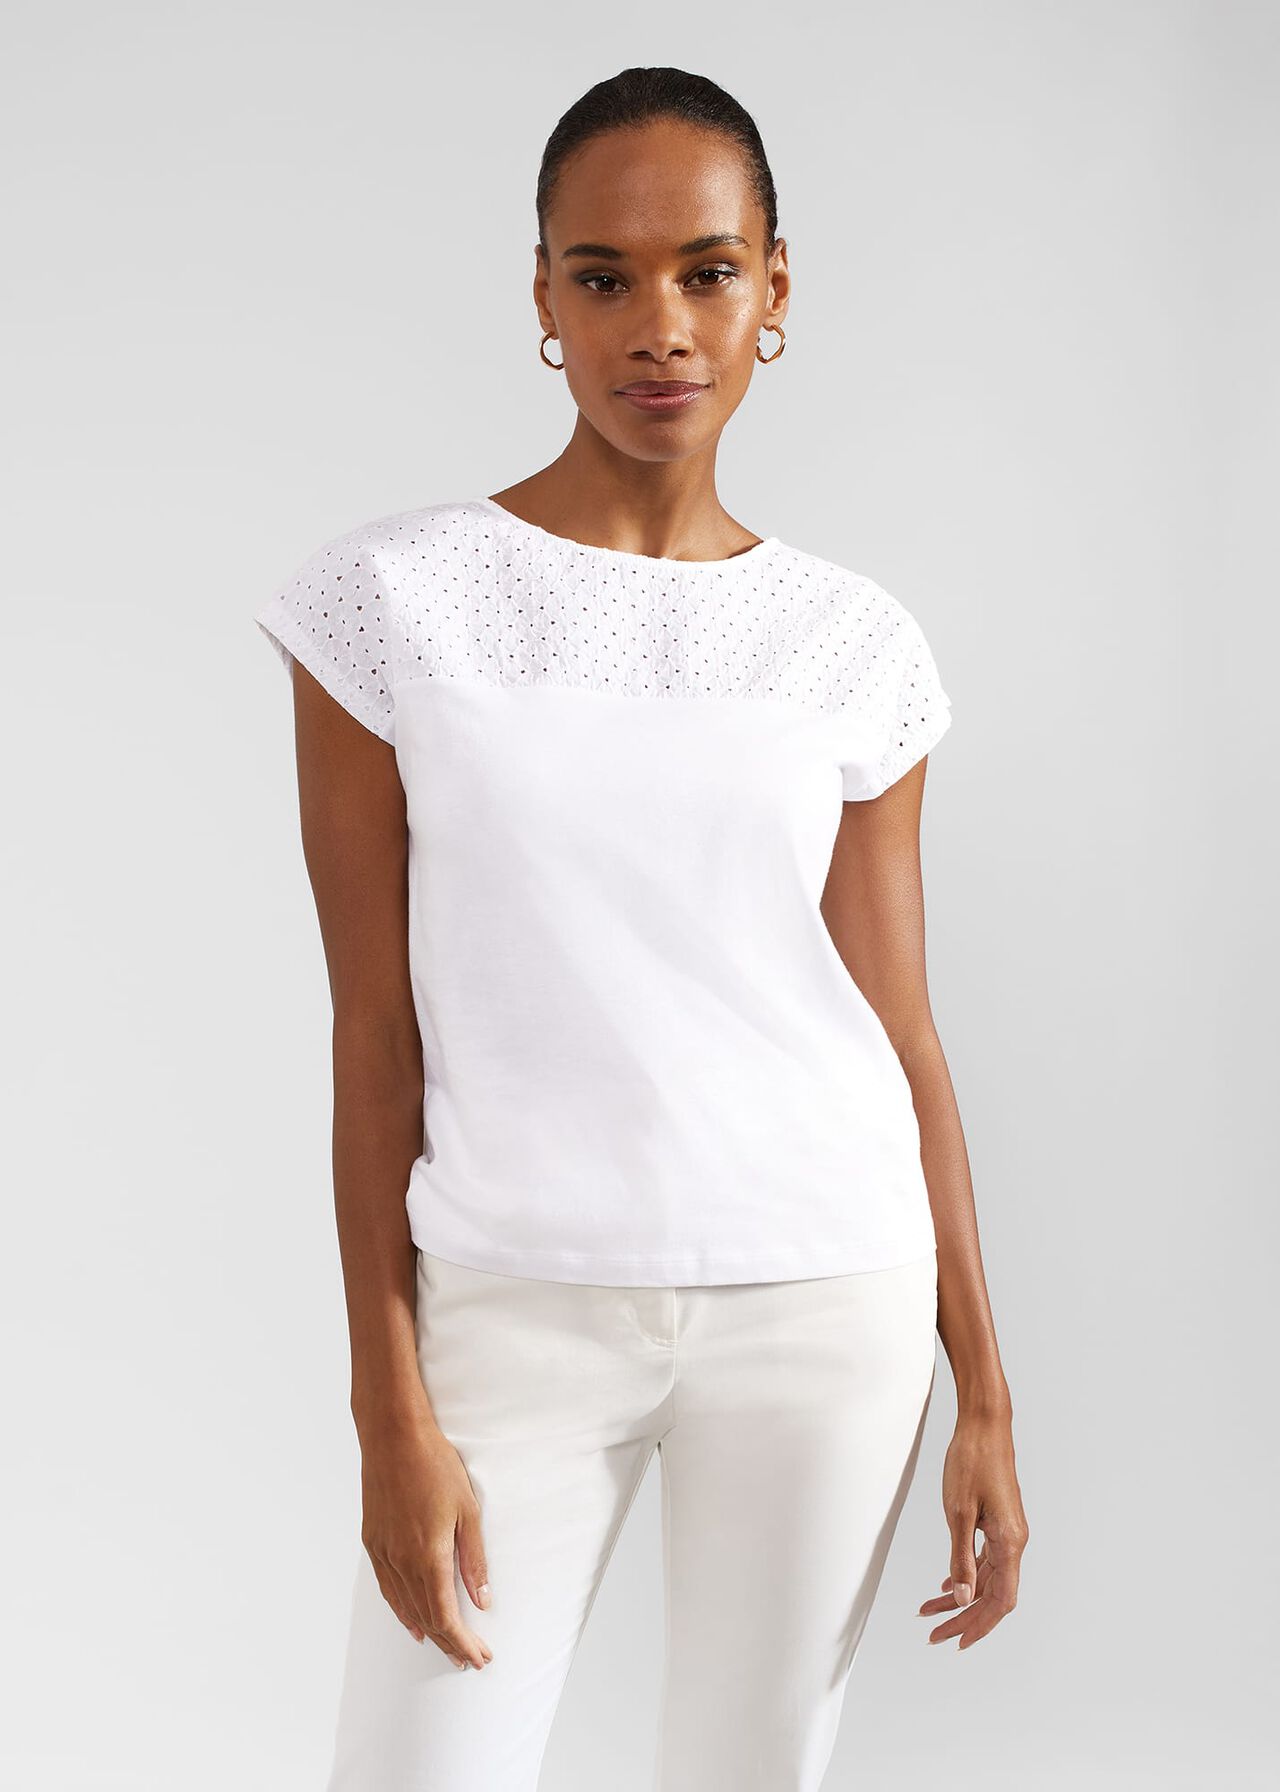 Thea Cotton Broderie Top, White, hi-res